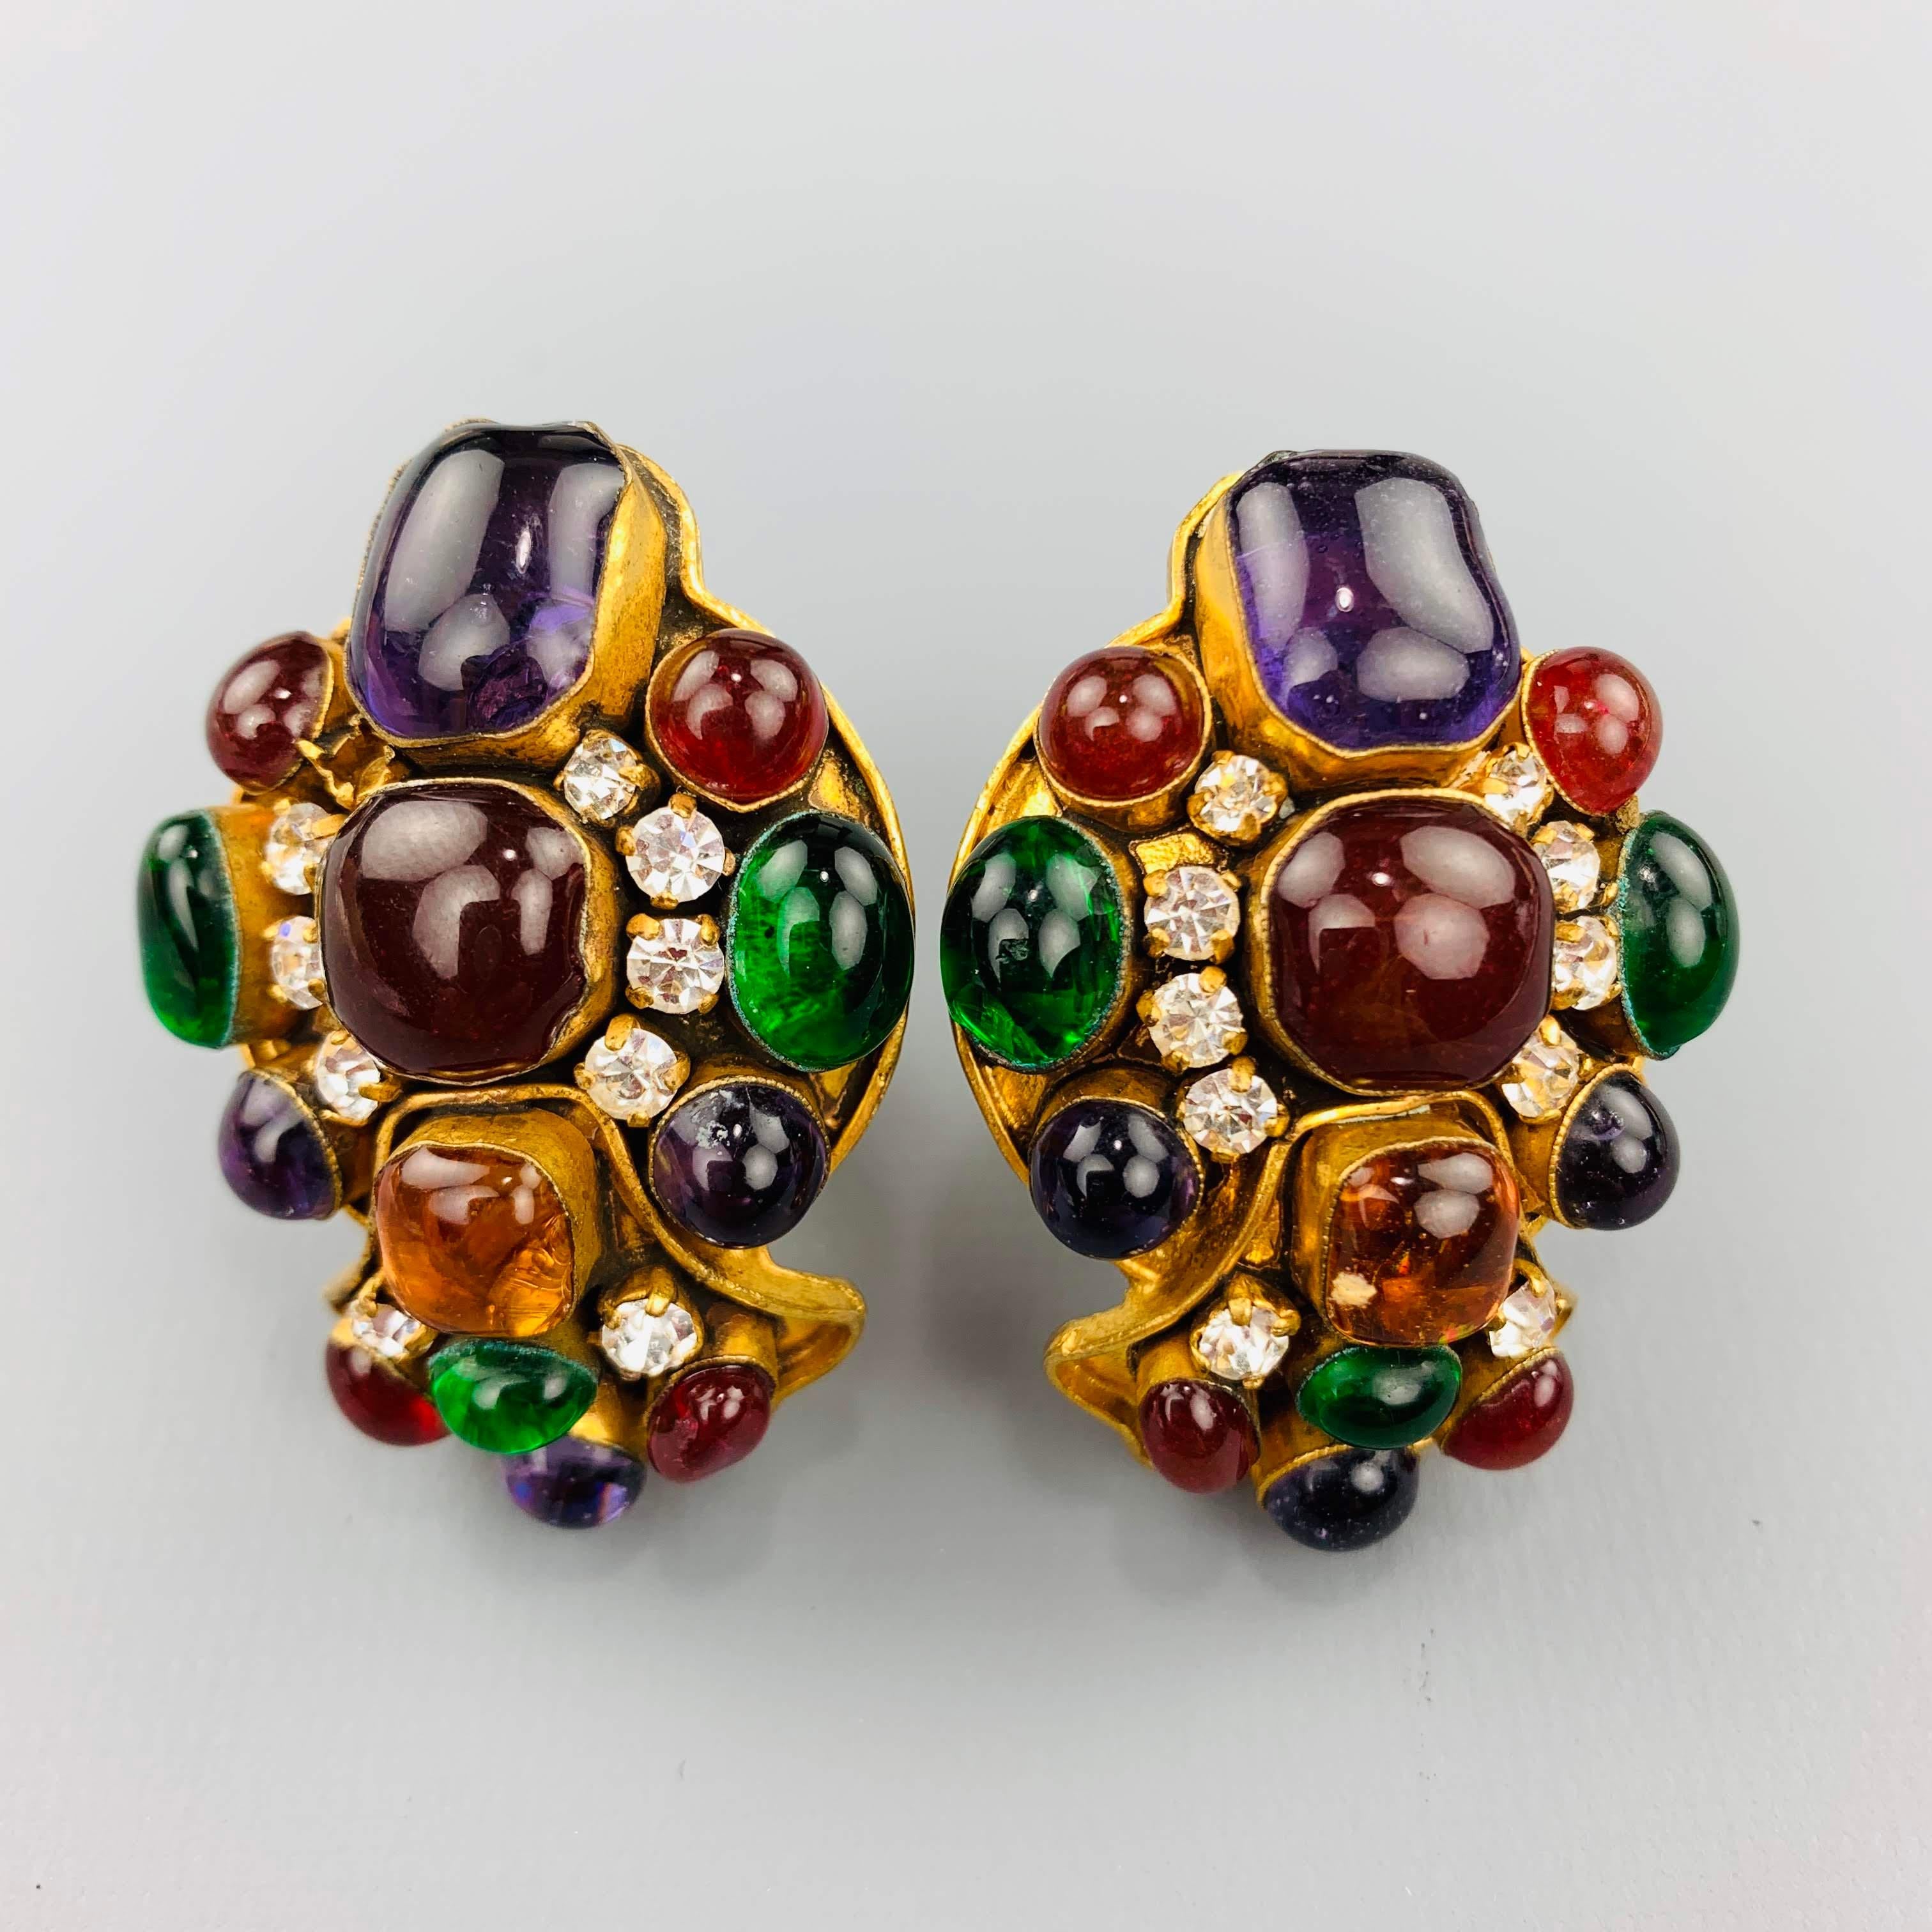 Vintage CHANEL circa 1993 clip on Gripoix Byzantine style clip on earrings come in gold tone metal with a cluster of multi color stones and  clear rhinestones. Missing one stone. As-is. Made in France.
 
Good Pre-Owned Condition.
Marked: 93
 
3 x